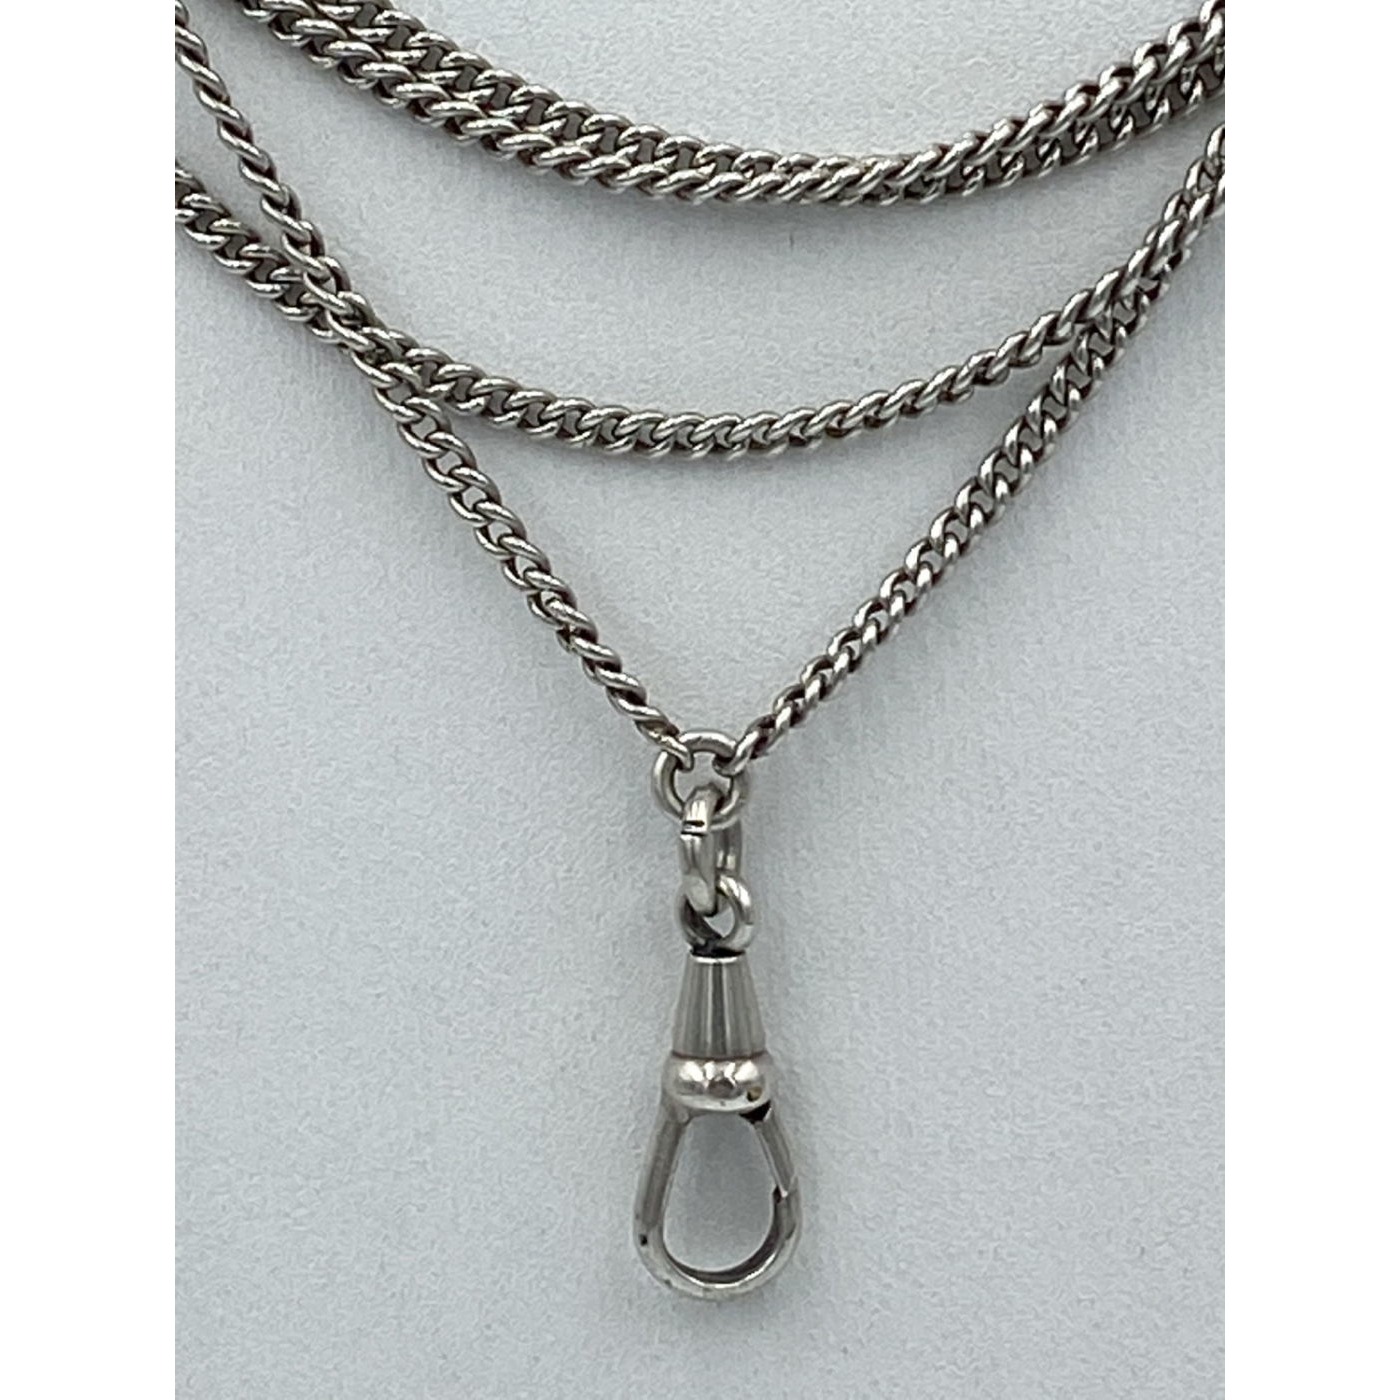 Versatile 54" long Sterling Silver Victorian Chain